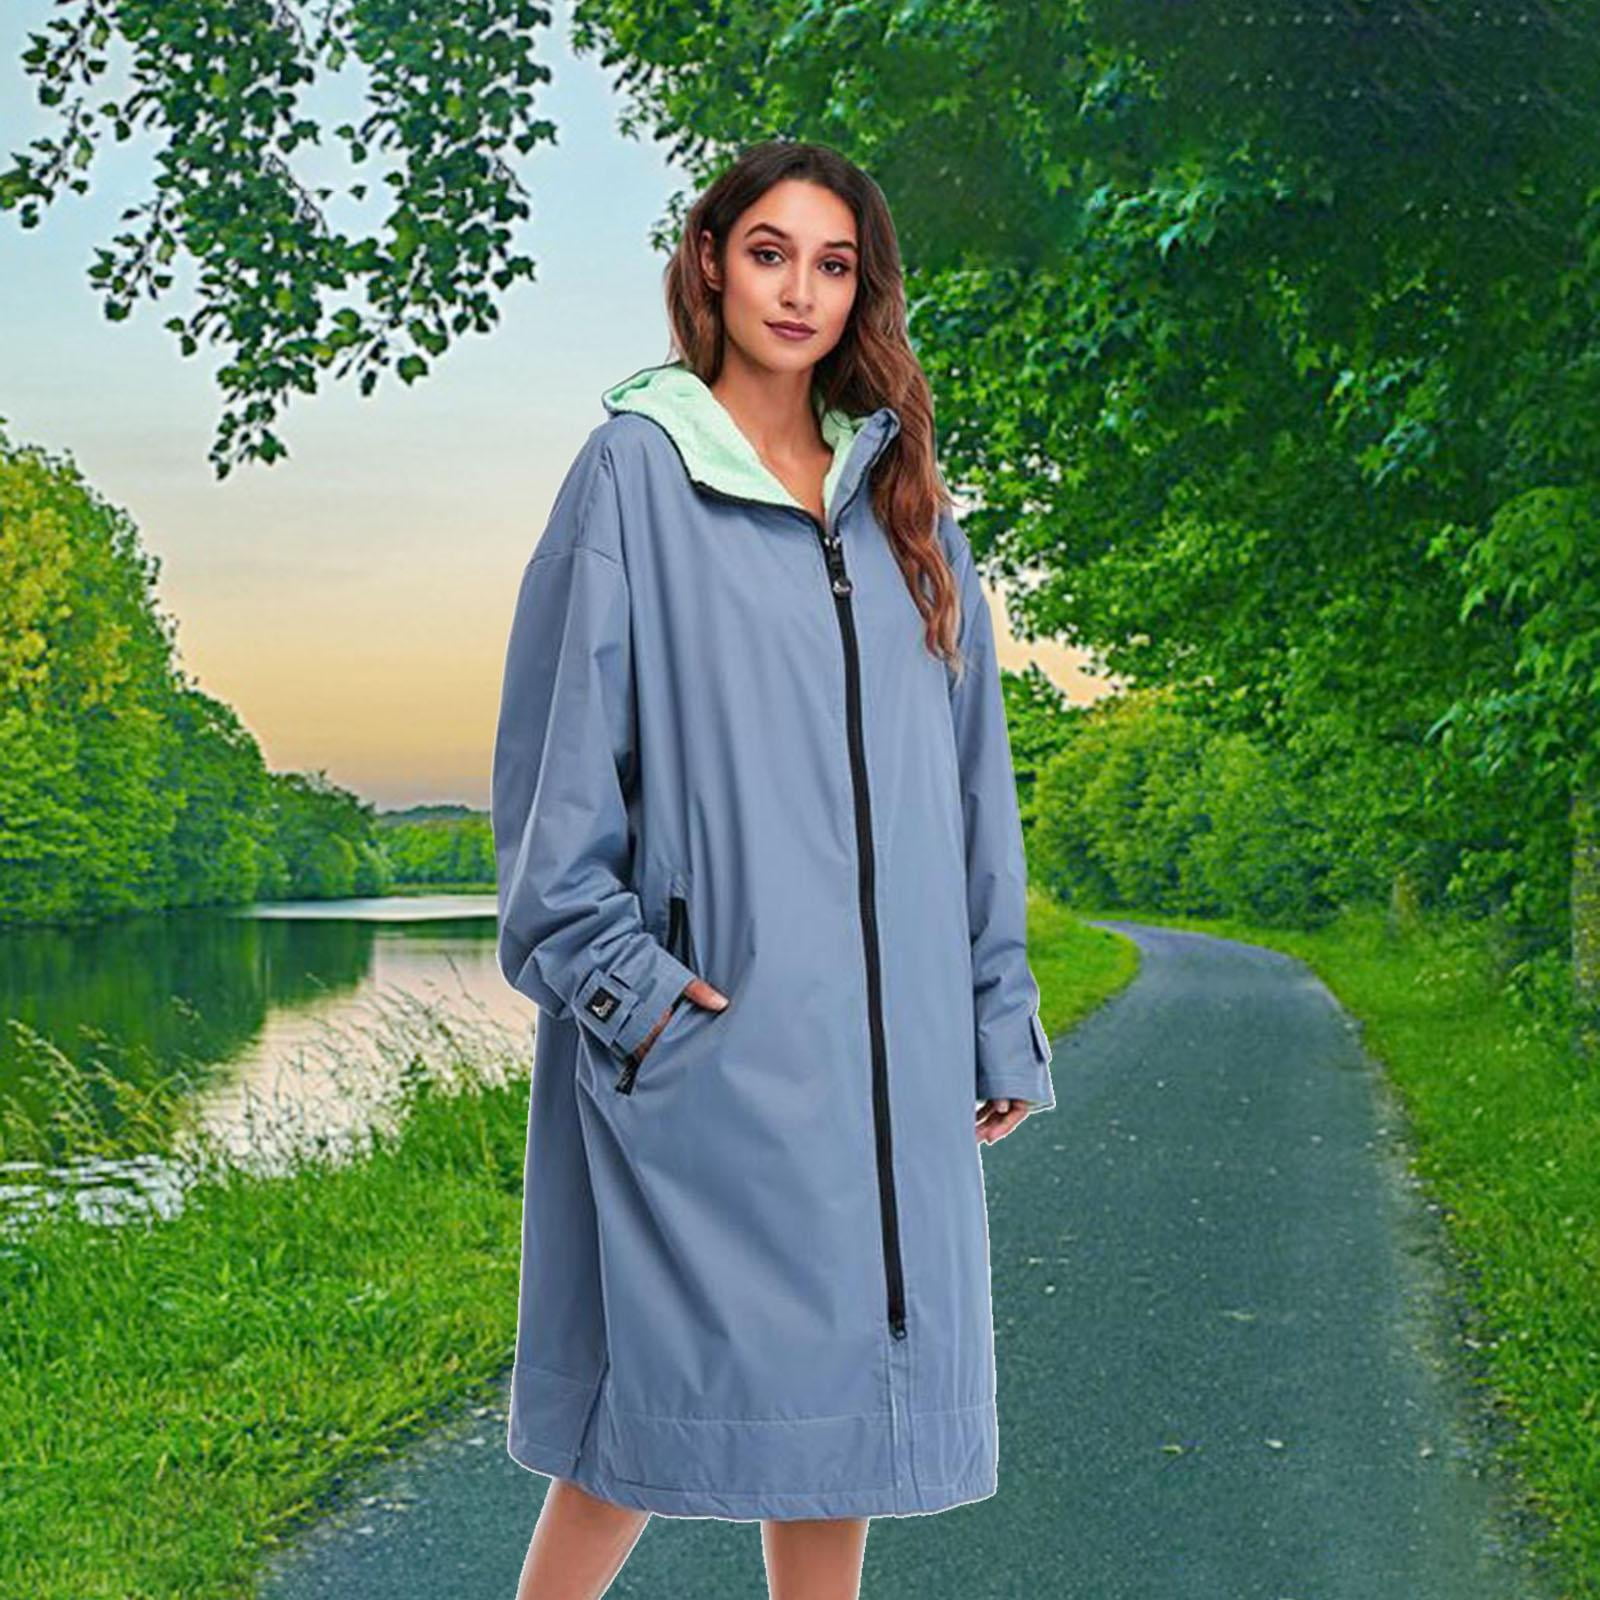 WOMENS HOODED FLEECE FESTIVAL PONCHO COAT JACKET BEACH CHANGING ROBE CAMPING 